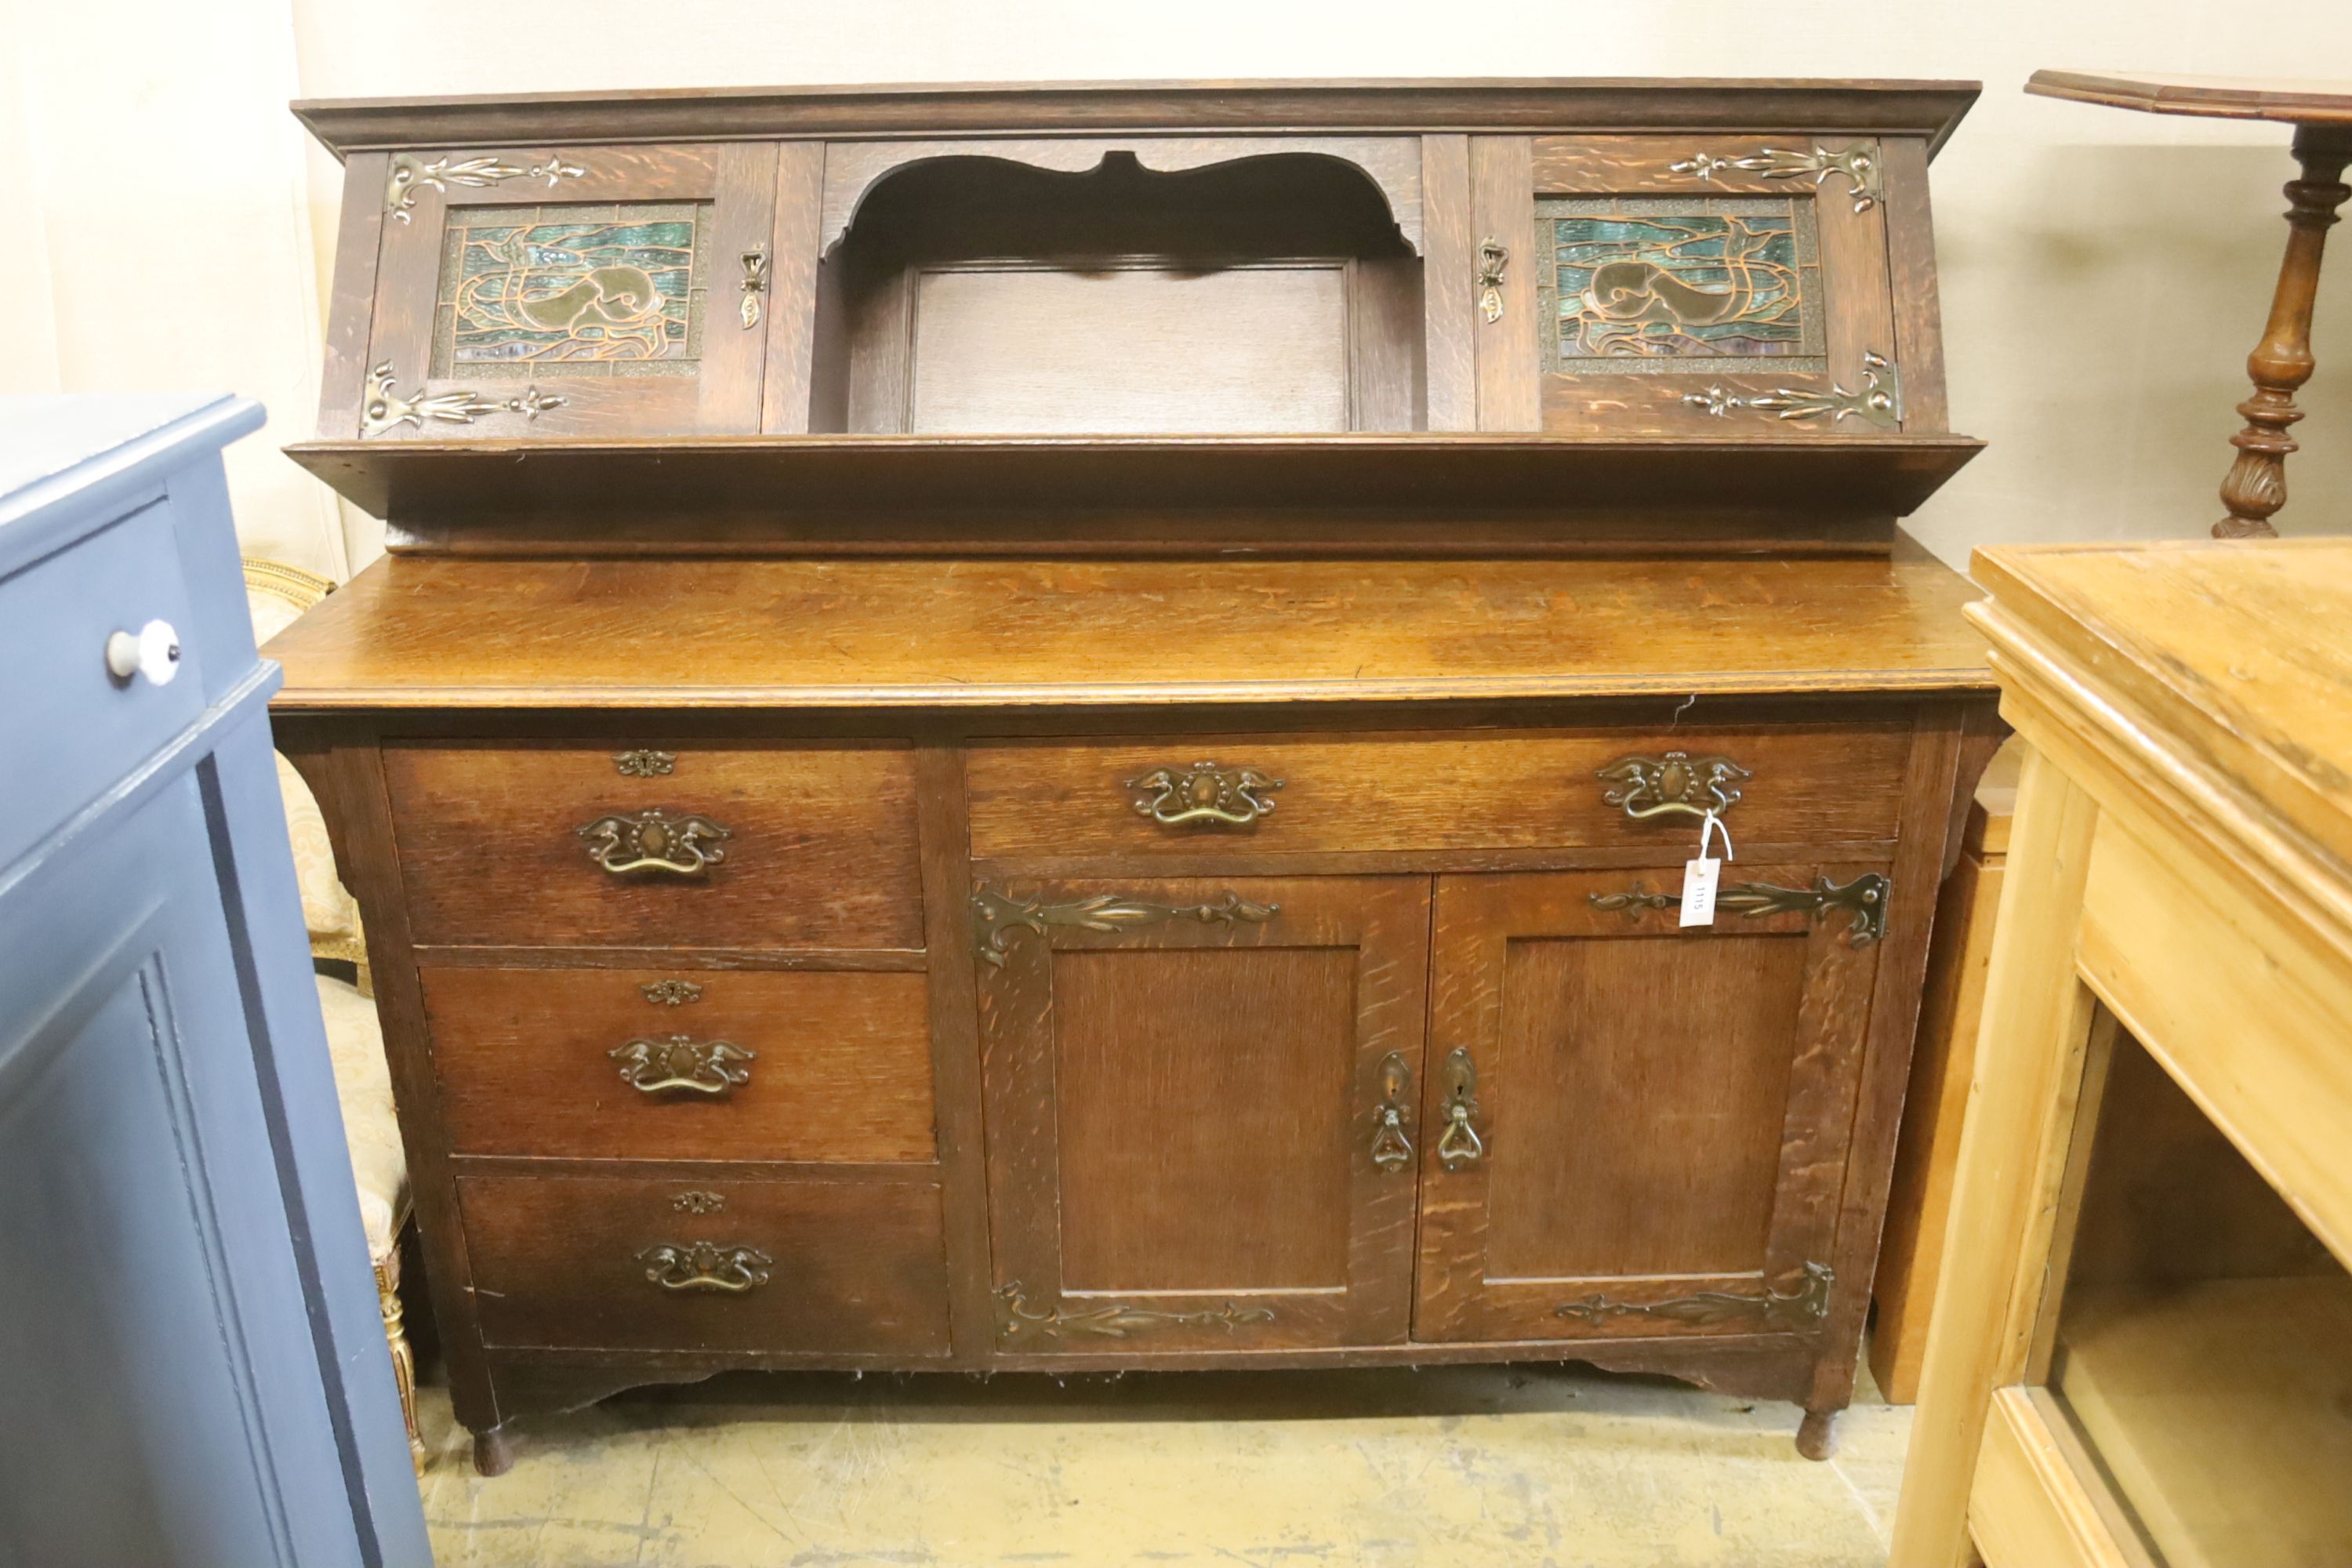 An Arts & Crafts style oak sideboard with stained glass dolphin panels, length 182cm, depth 60cm, height 145cm (lacks top section suppo